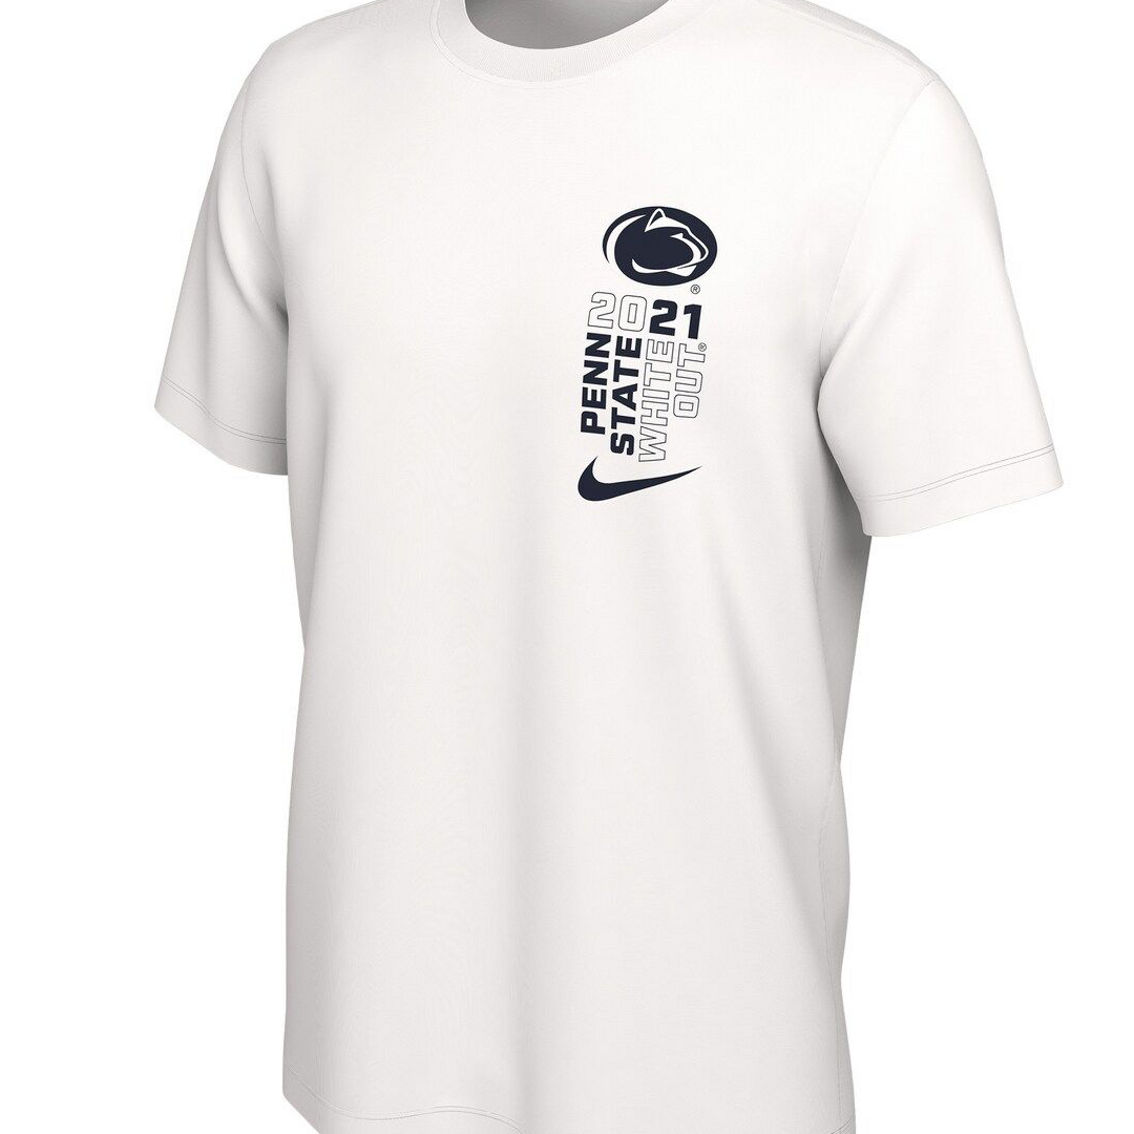 Nike Men's White Penn State Nittany Lions 2021 White Out Student T-Shirt - Image 3 of 4